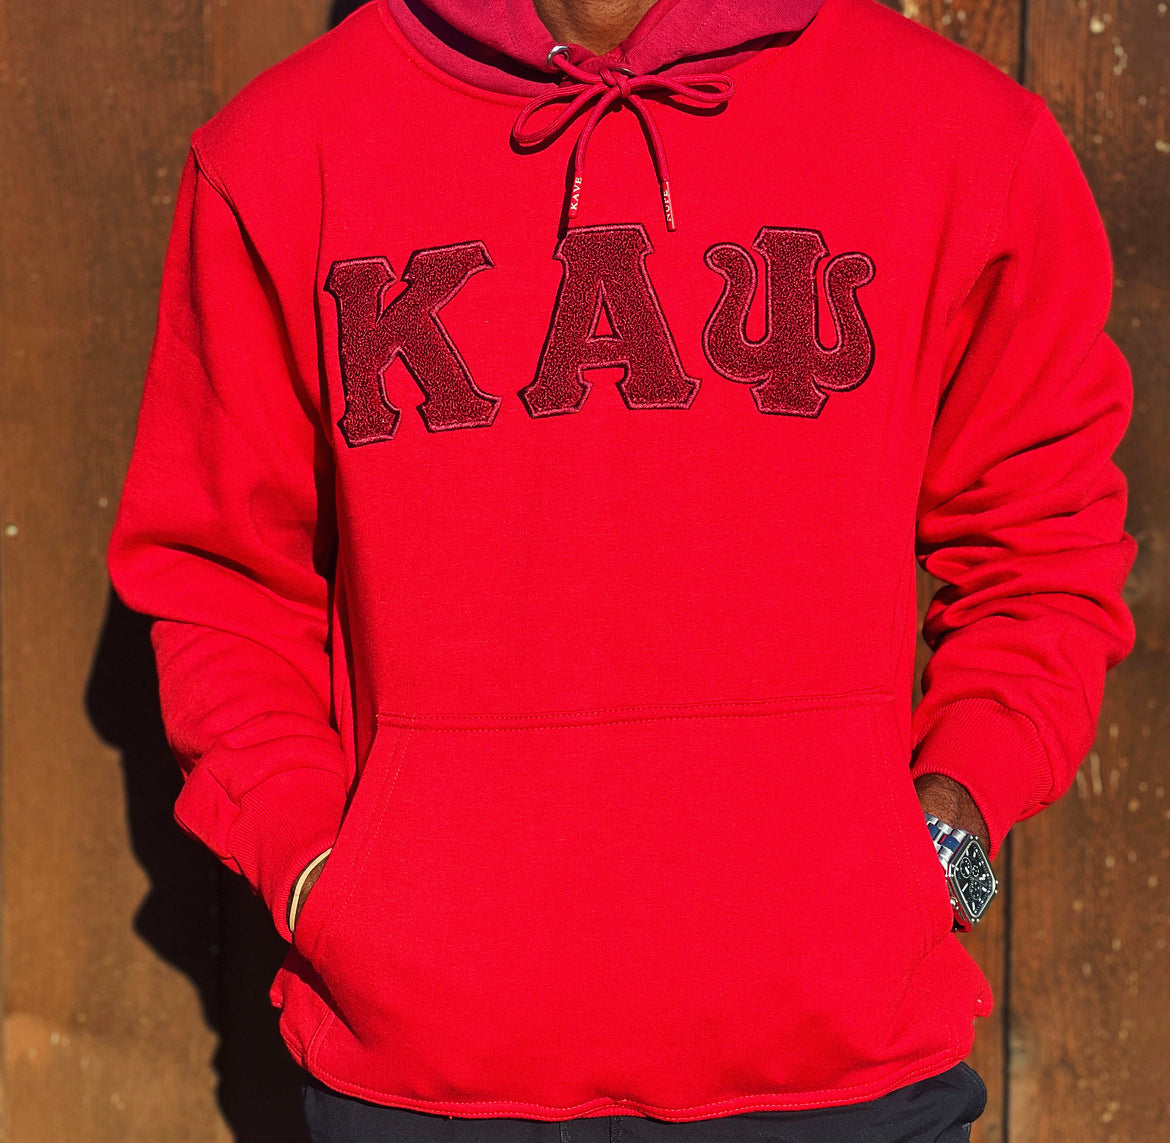 Stay warm and cozy with this Kappa Alpha Psi Red Shield Hoodie. Designed with the fraternity members in mind, it features the iconic shield logo on the front and is perfect for any member Kappa Alpha Psi. Made with high-quality materials, this hoodie is durable and built to last through the years. Whether you're out and about or lounging at home, this hoodie is a must-have item for any Kappa Alpha Psi organization member.